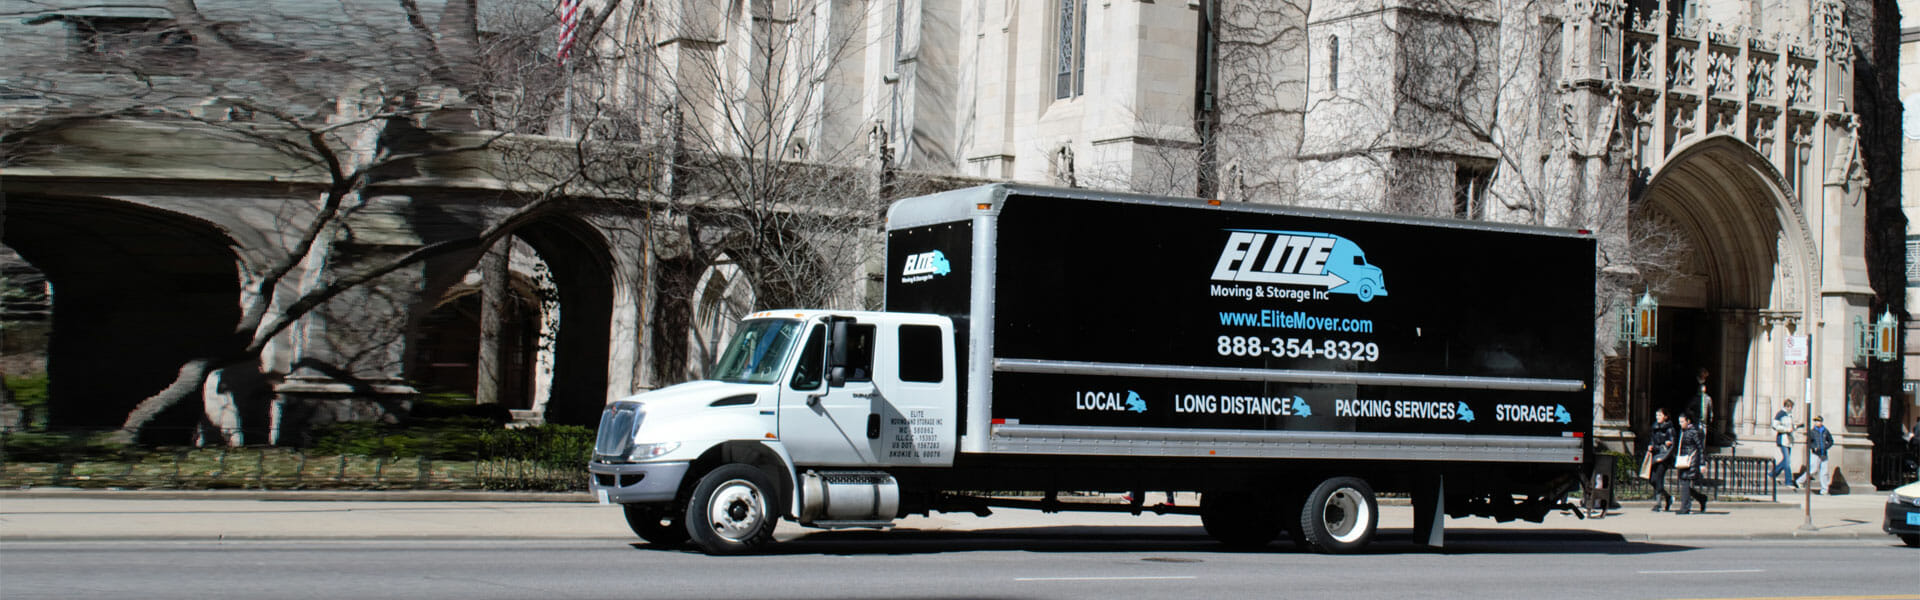 chicago local moving company